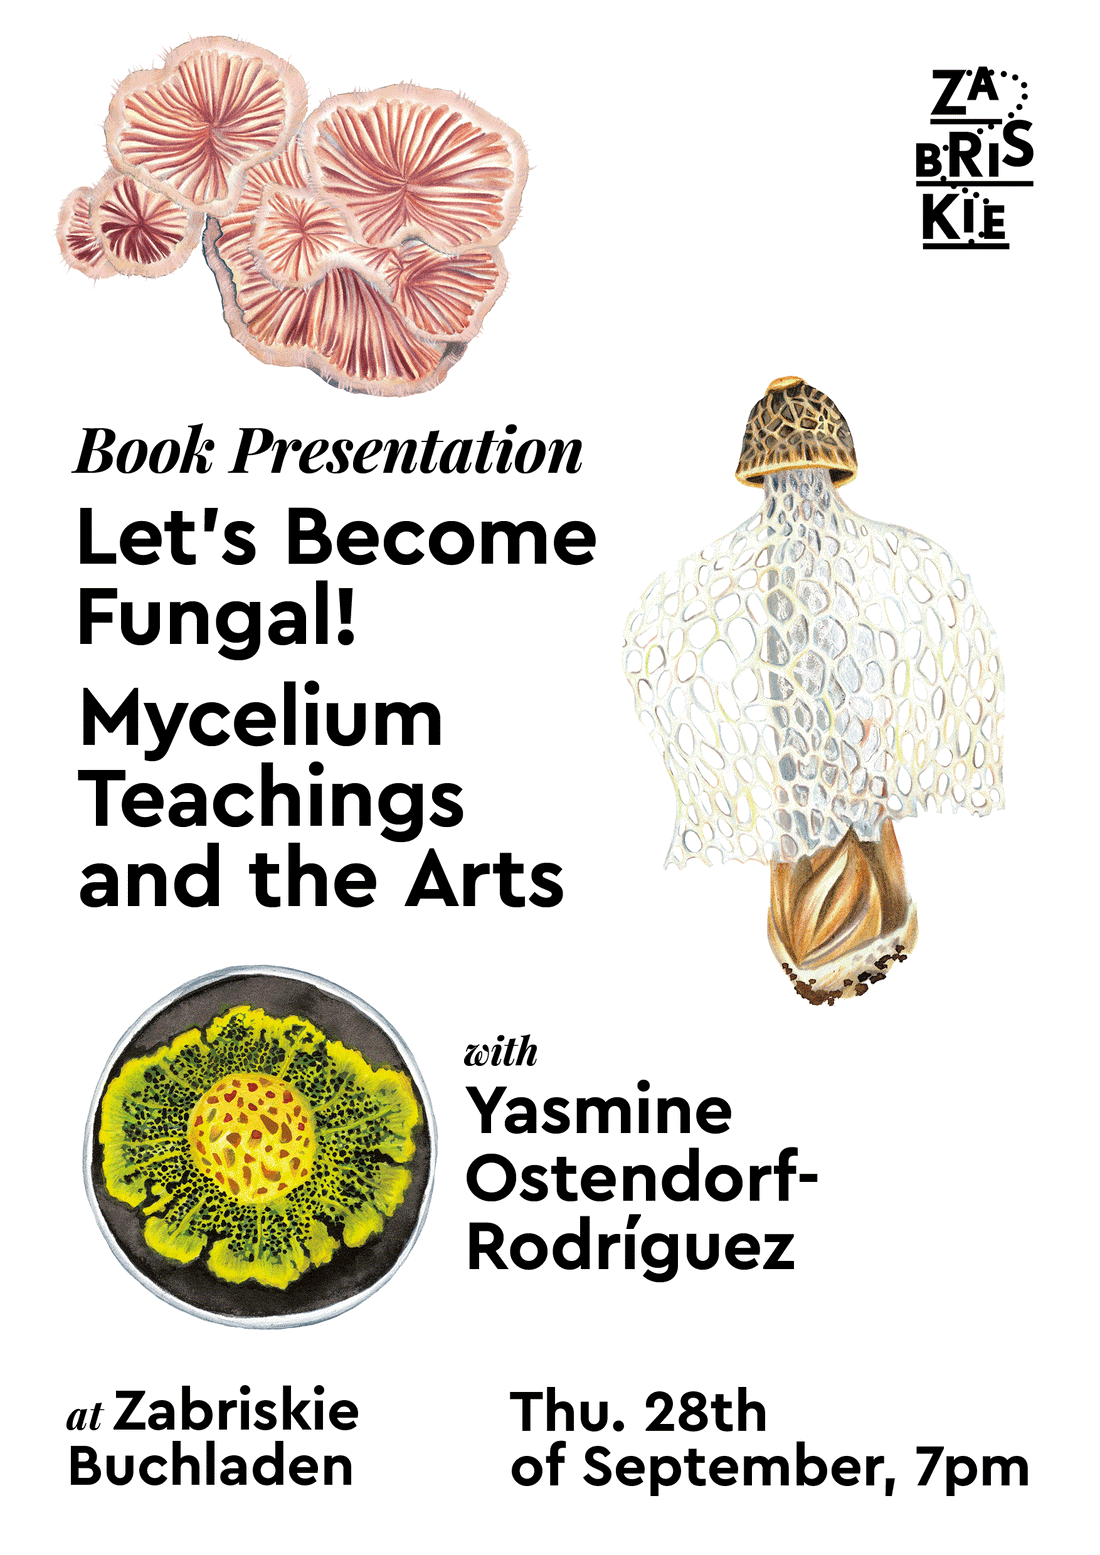 Book Presentation: Let’s Become Fungal! Mycelium Teachings and the Arts, with Yasmine Ostendorf-Rodríguez